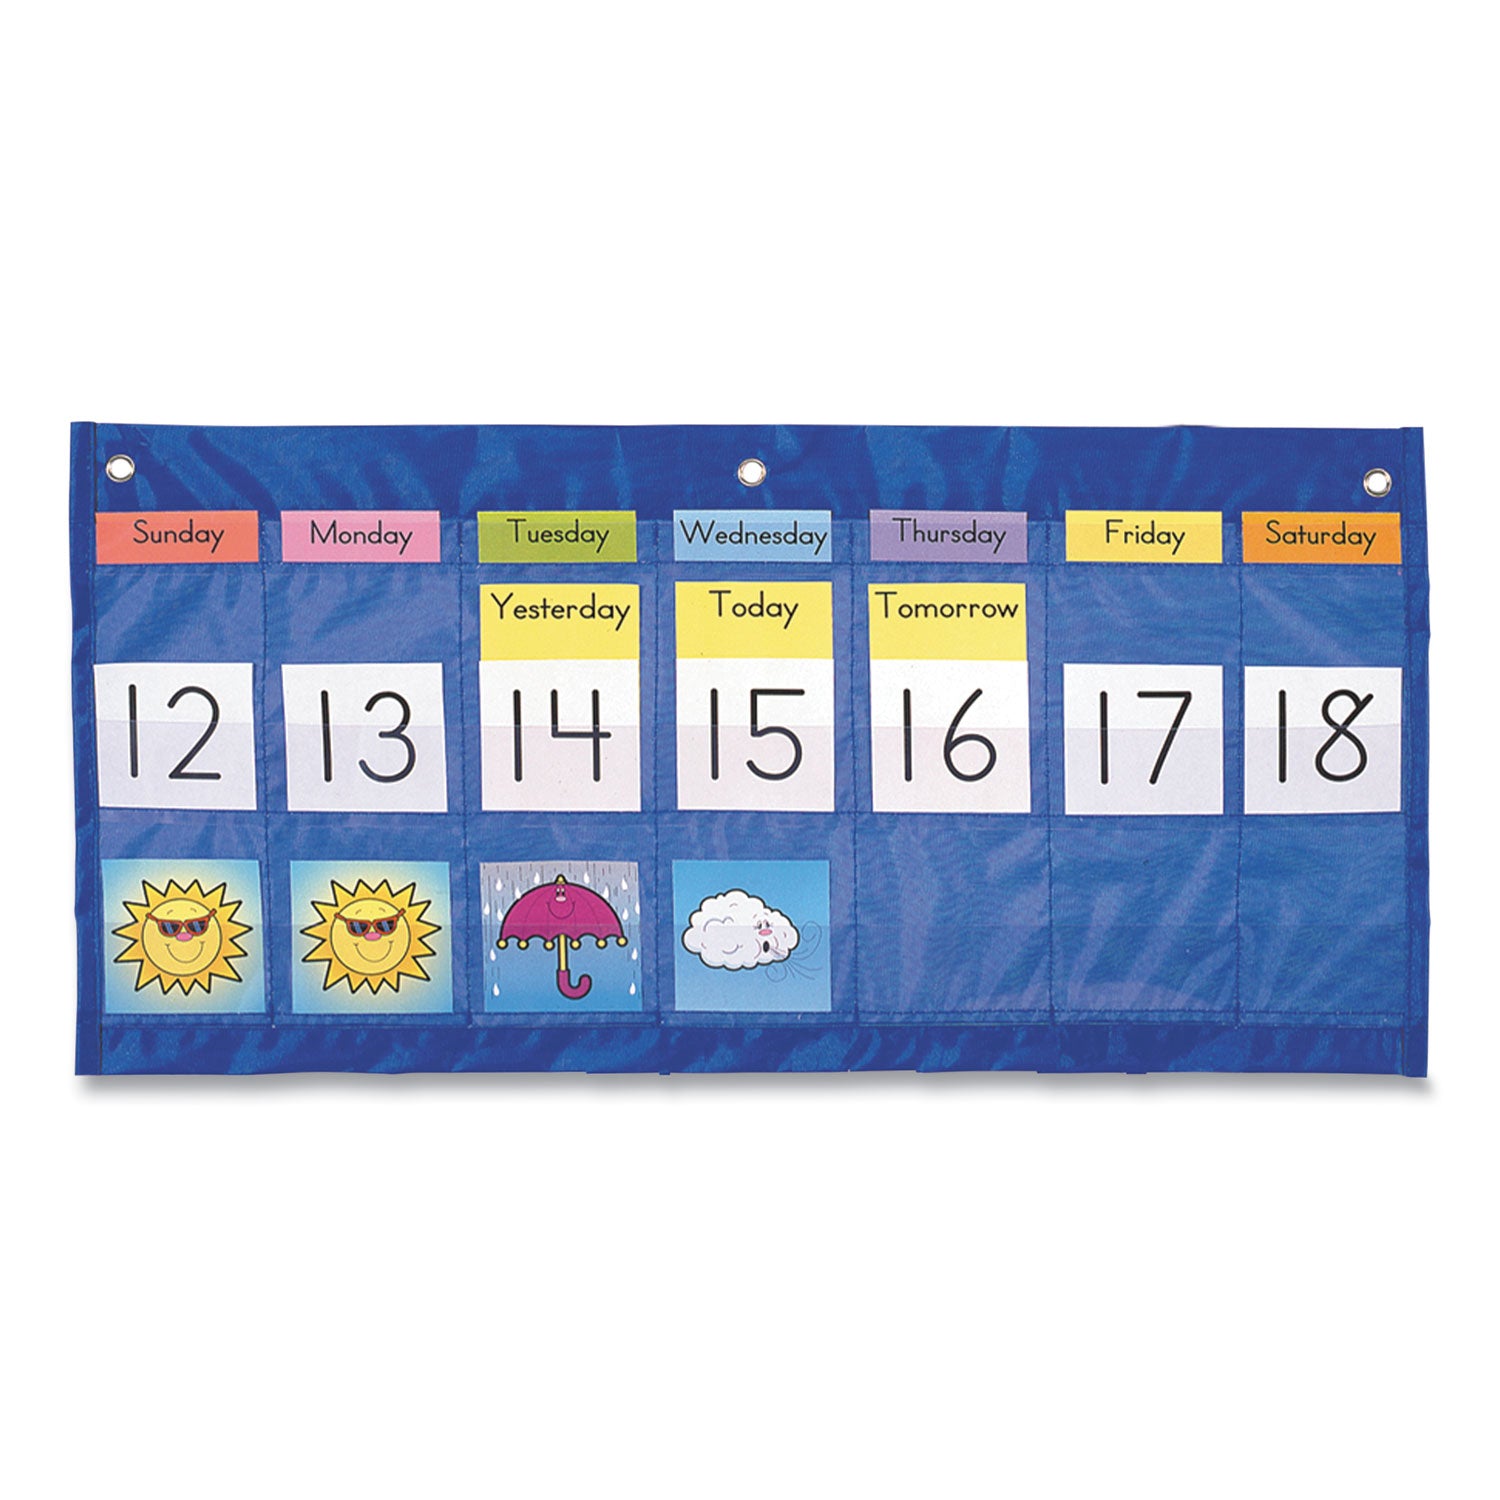 weekly-calendar-with-weather-21-pockets-25-x-1275-blue_cdp5636 - 1